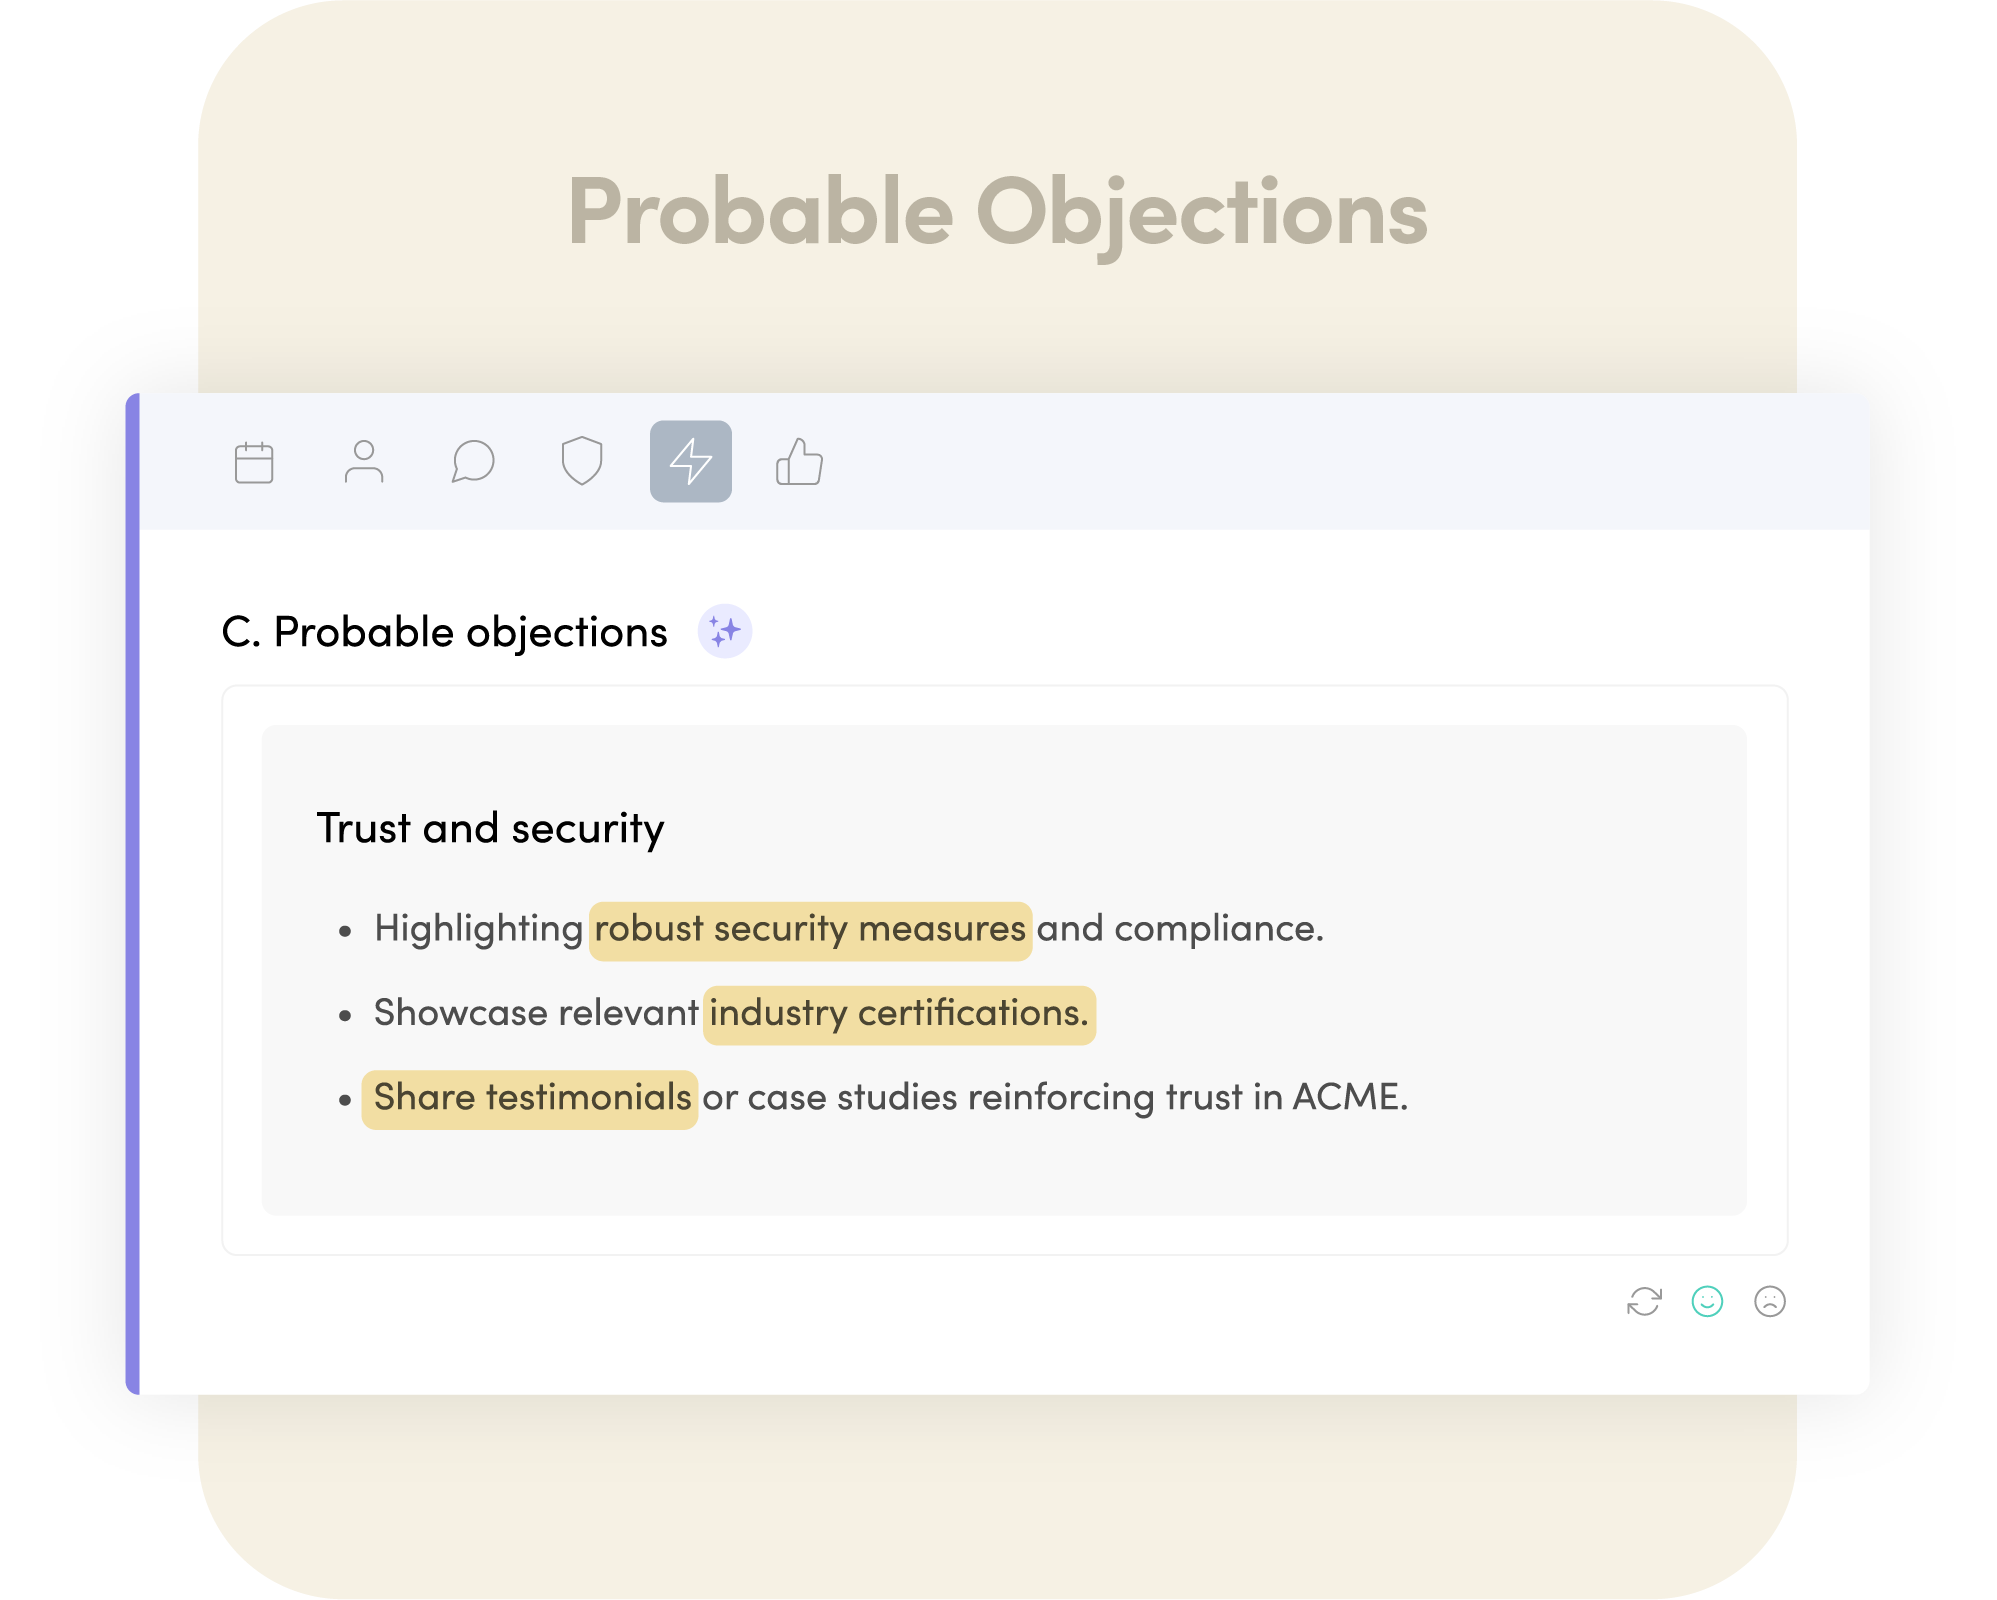 Sales triage prioritize leads - Step 5 - Probable objections